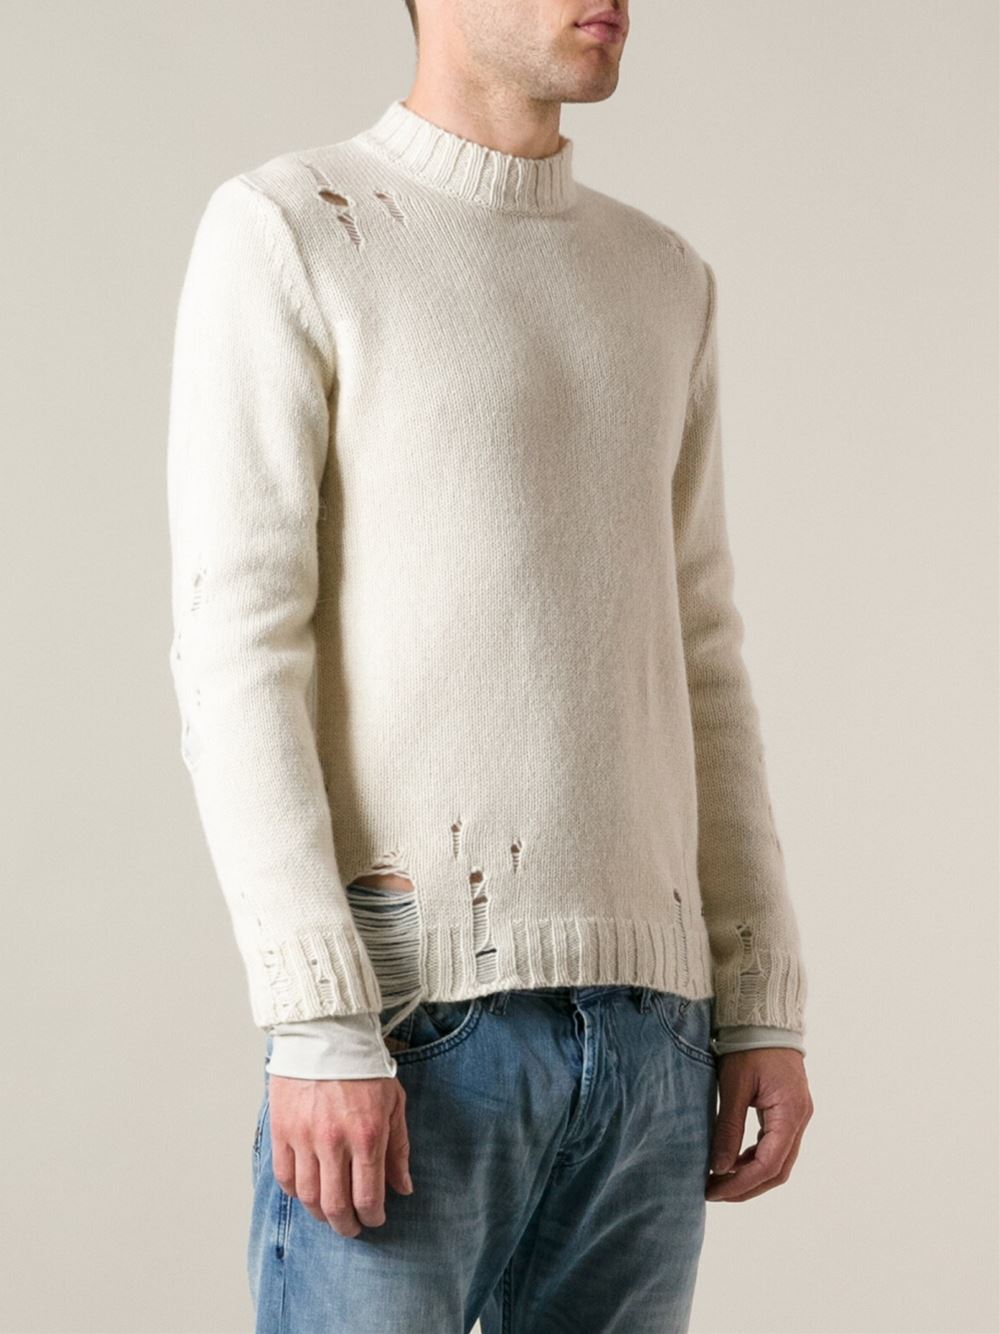 DIESEL Distressed Sweater in White for Men - Lyst